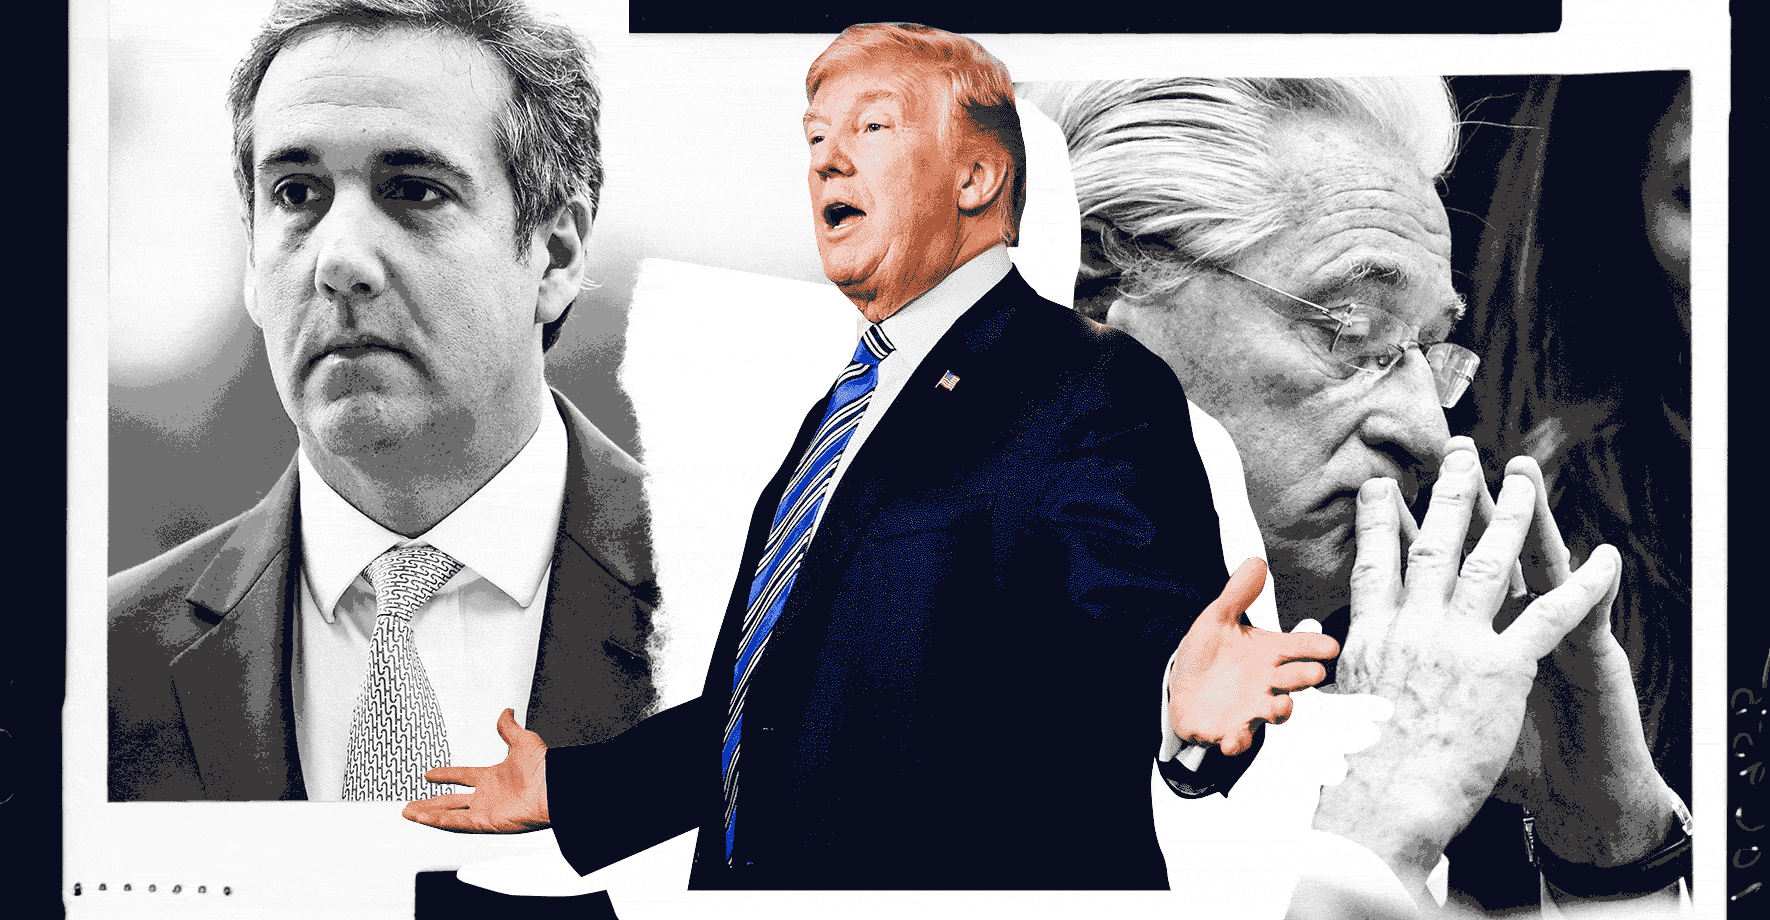 A GIF of Trump and his lawyers